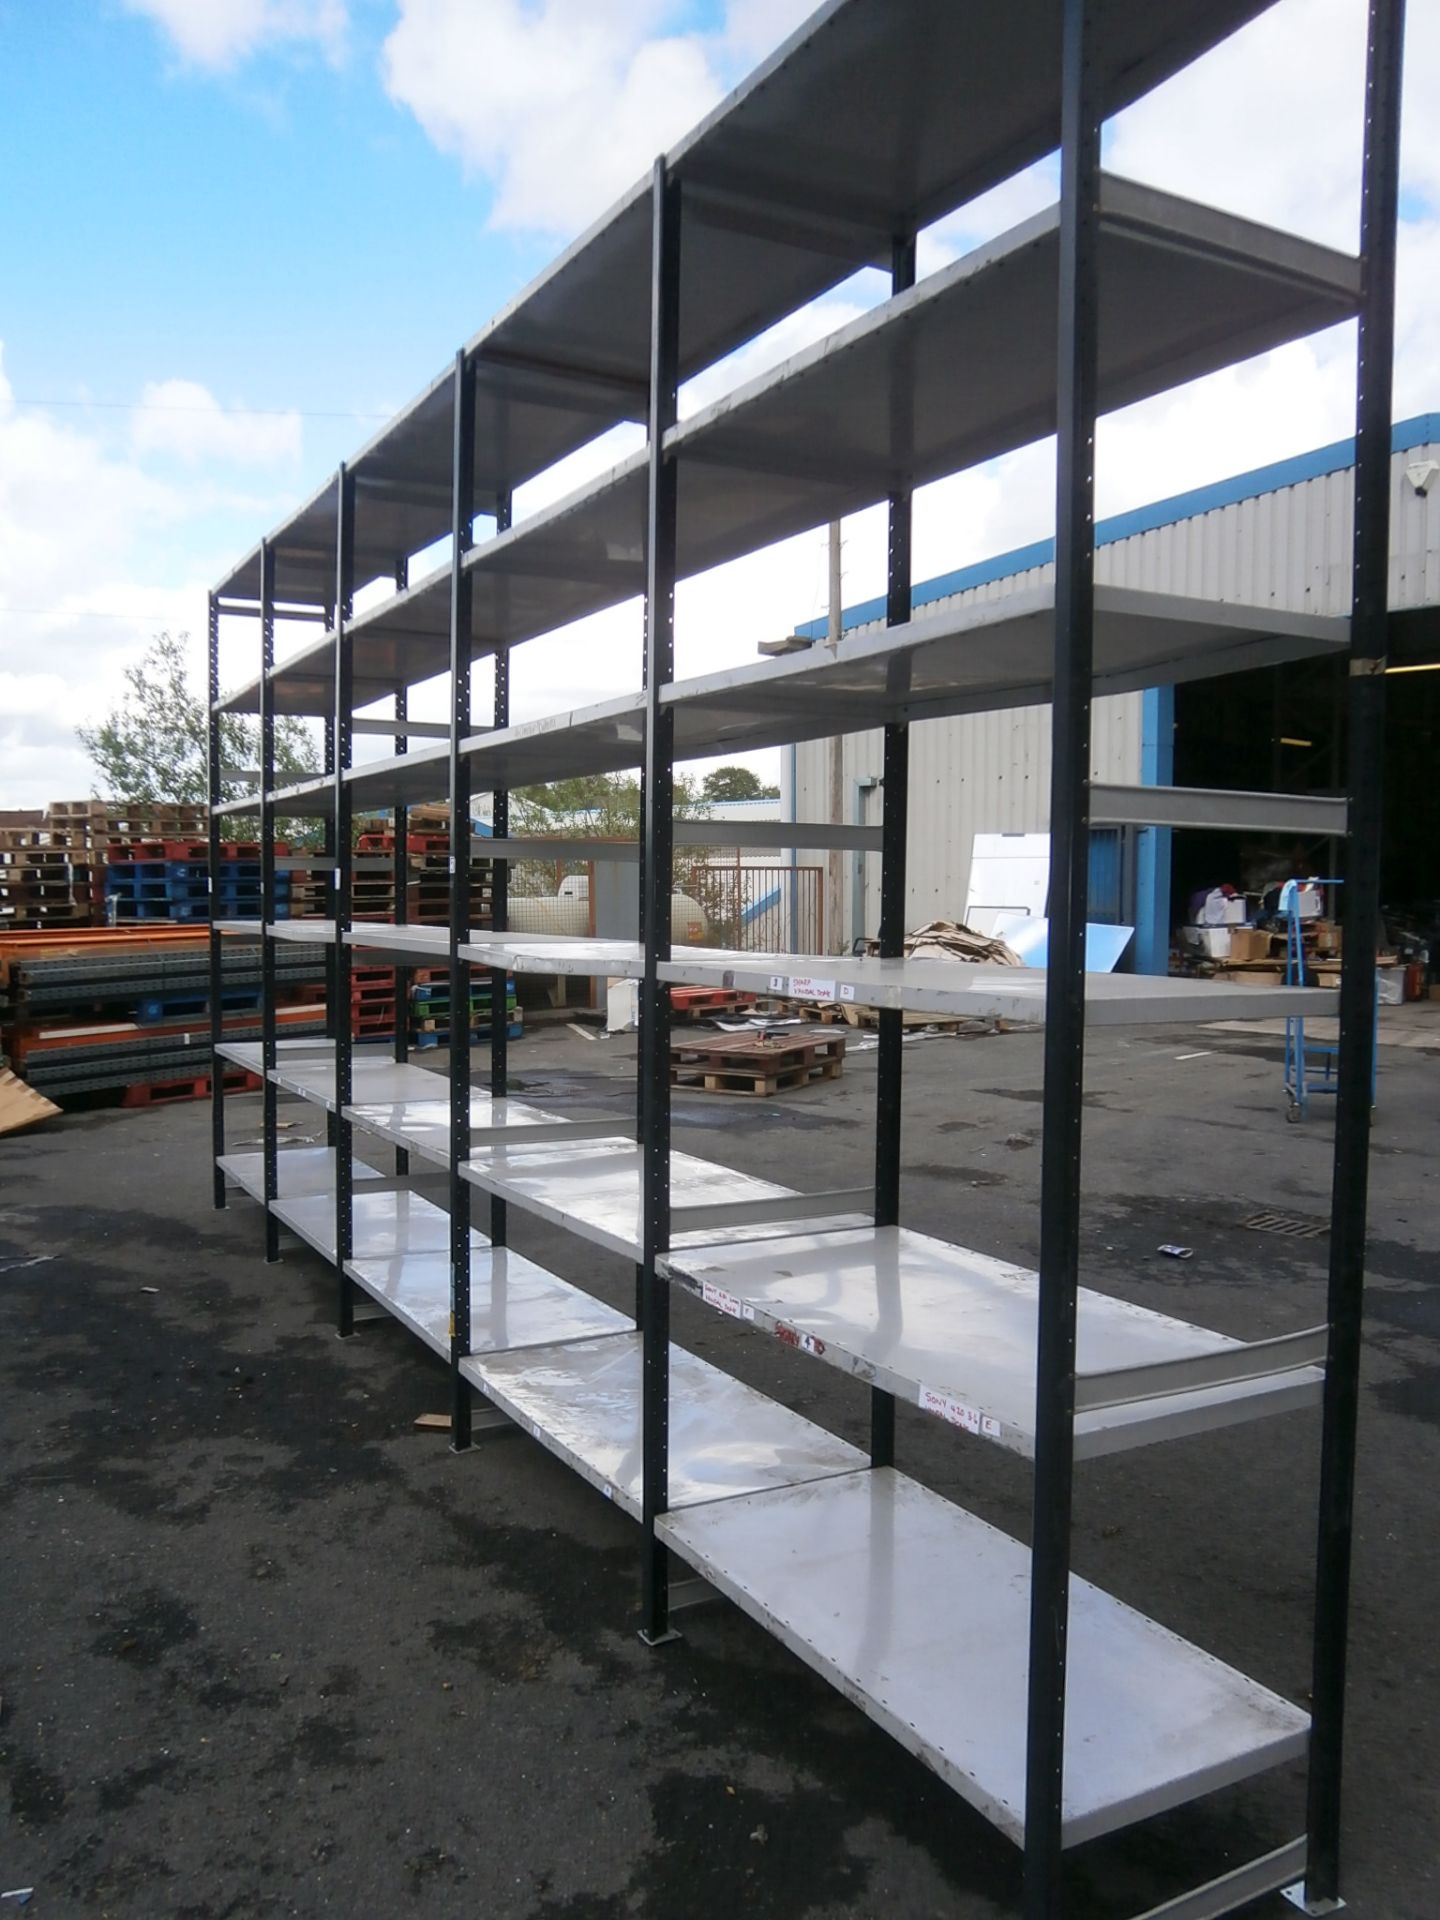 5 x Bays of Boltless Archive Shelving - Includes 6 x Uprights, 30 x Shelves and 120 Clips (Approx - Image 4 of 5